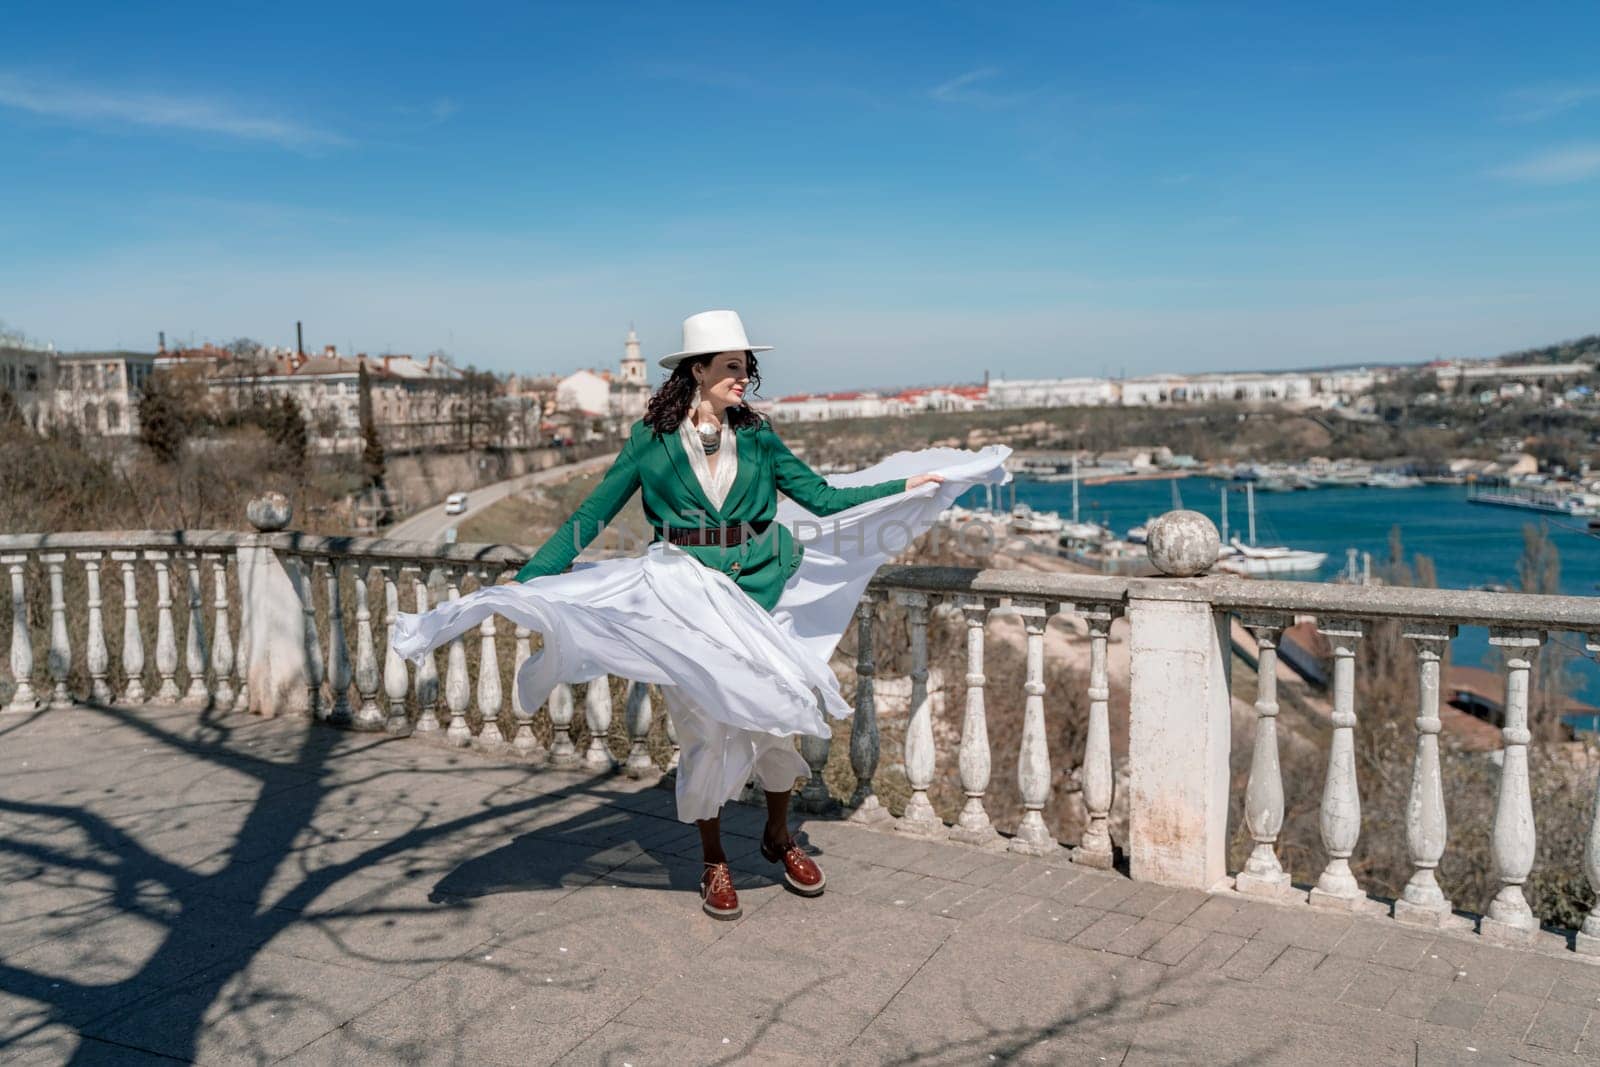 Woman walks around the city, lifestyle. Happy woman in a green jacket, white skirt and hat is sitting on a white fence with balusters overlooking the sea bay and the city. by Matiunina